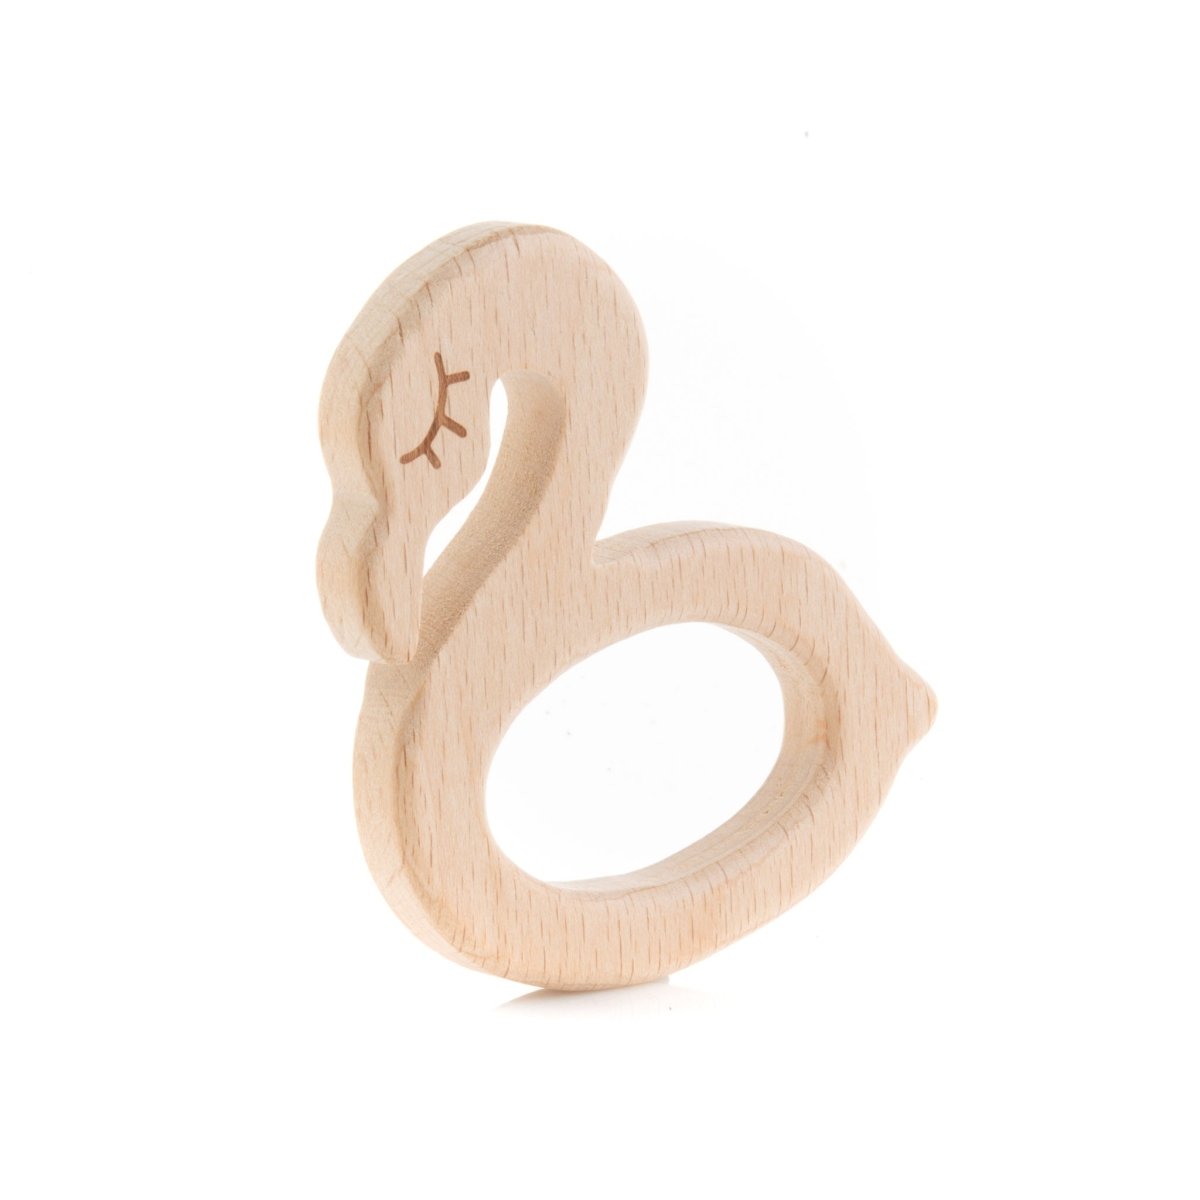 Wood Rings & Pendants Large - Beech Wood Flamingo from Cara & Co Craft Supply